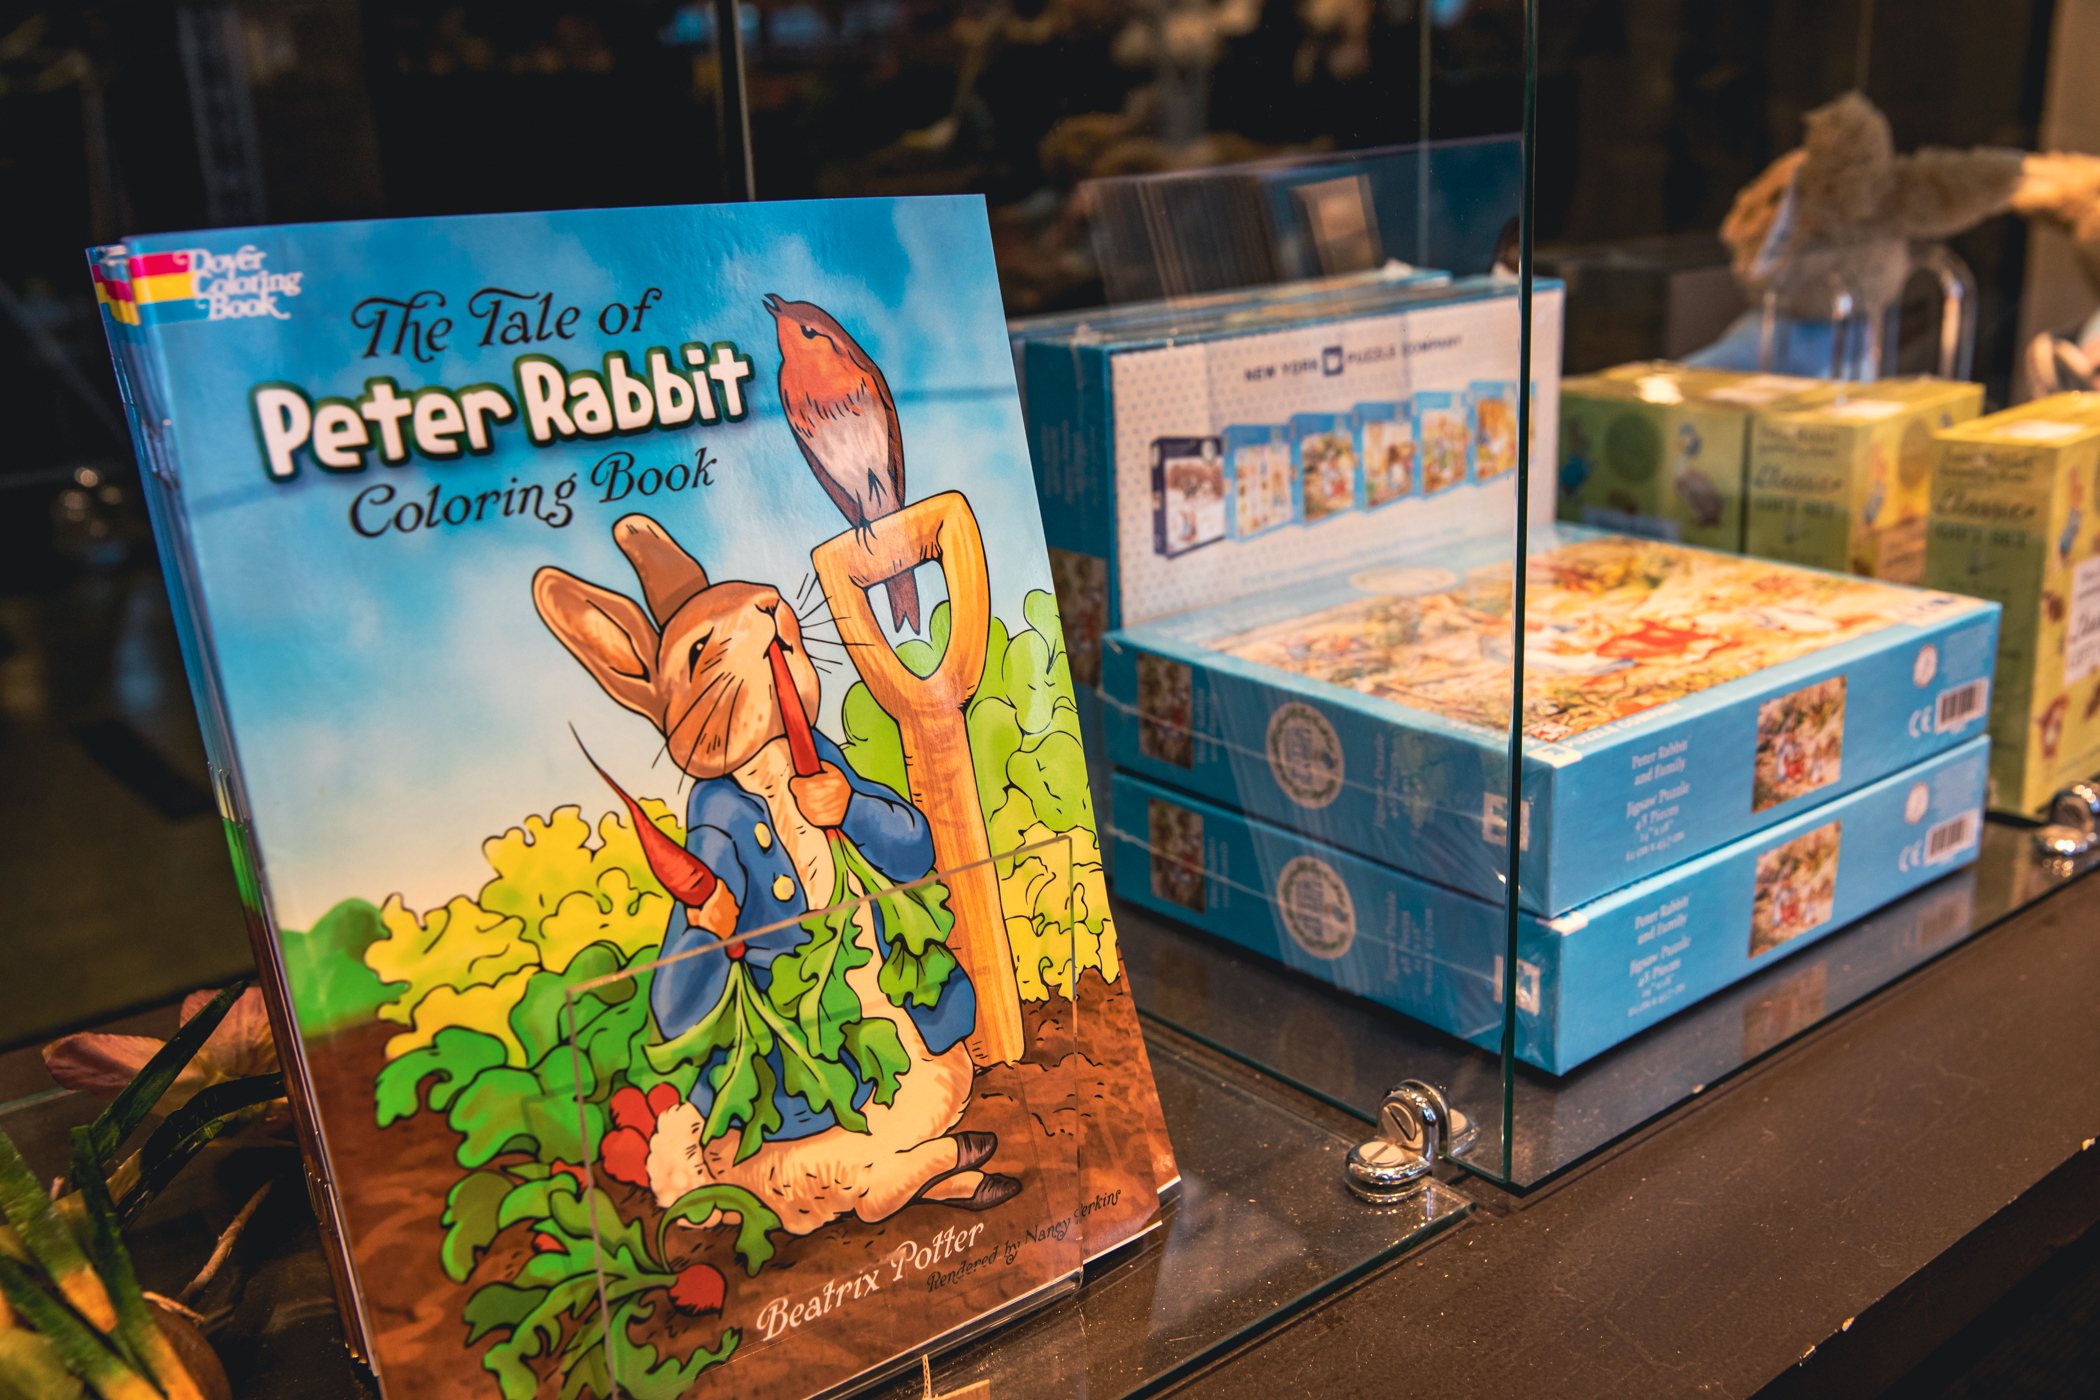 The Tale of Peter Rabbit coloring book propped up on a shelf